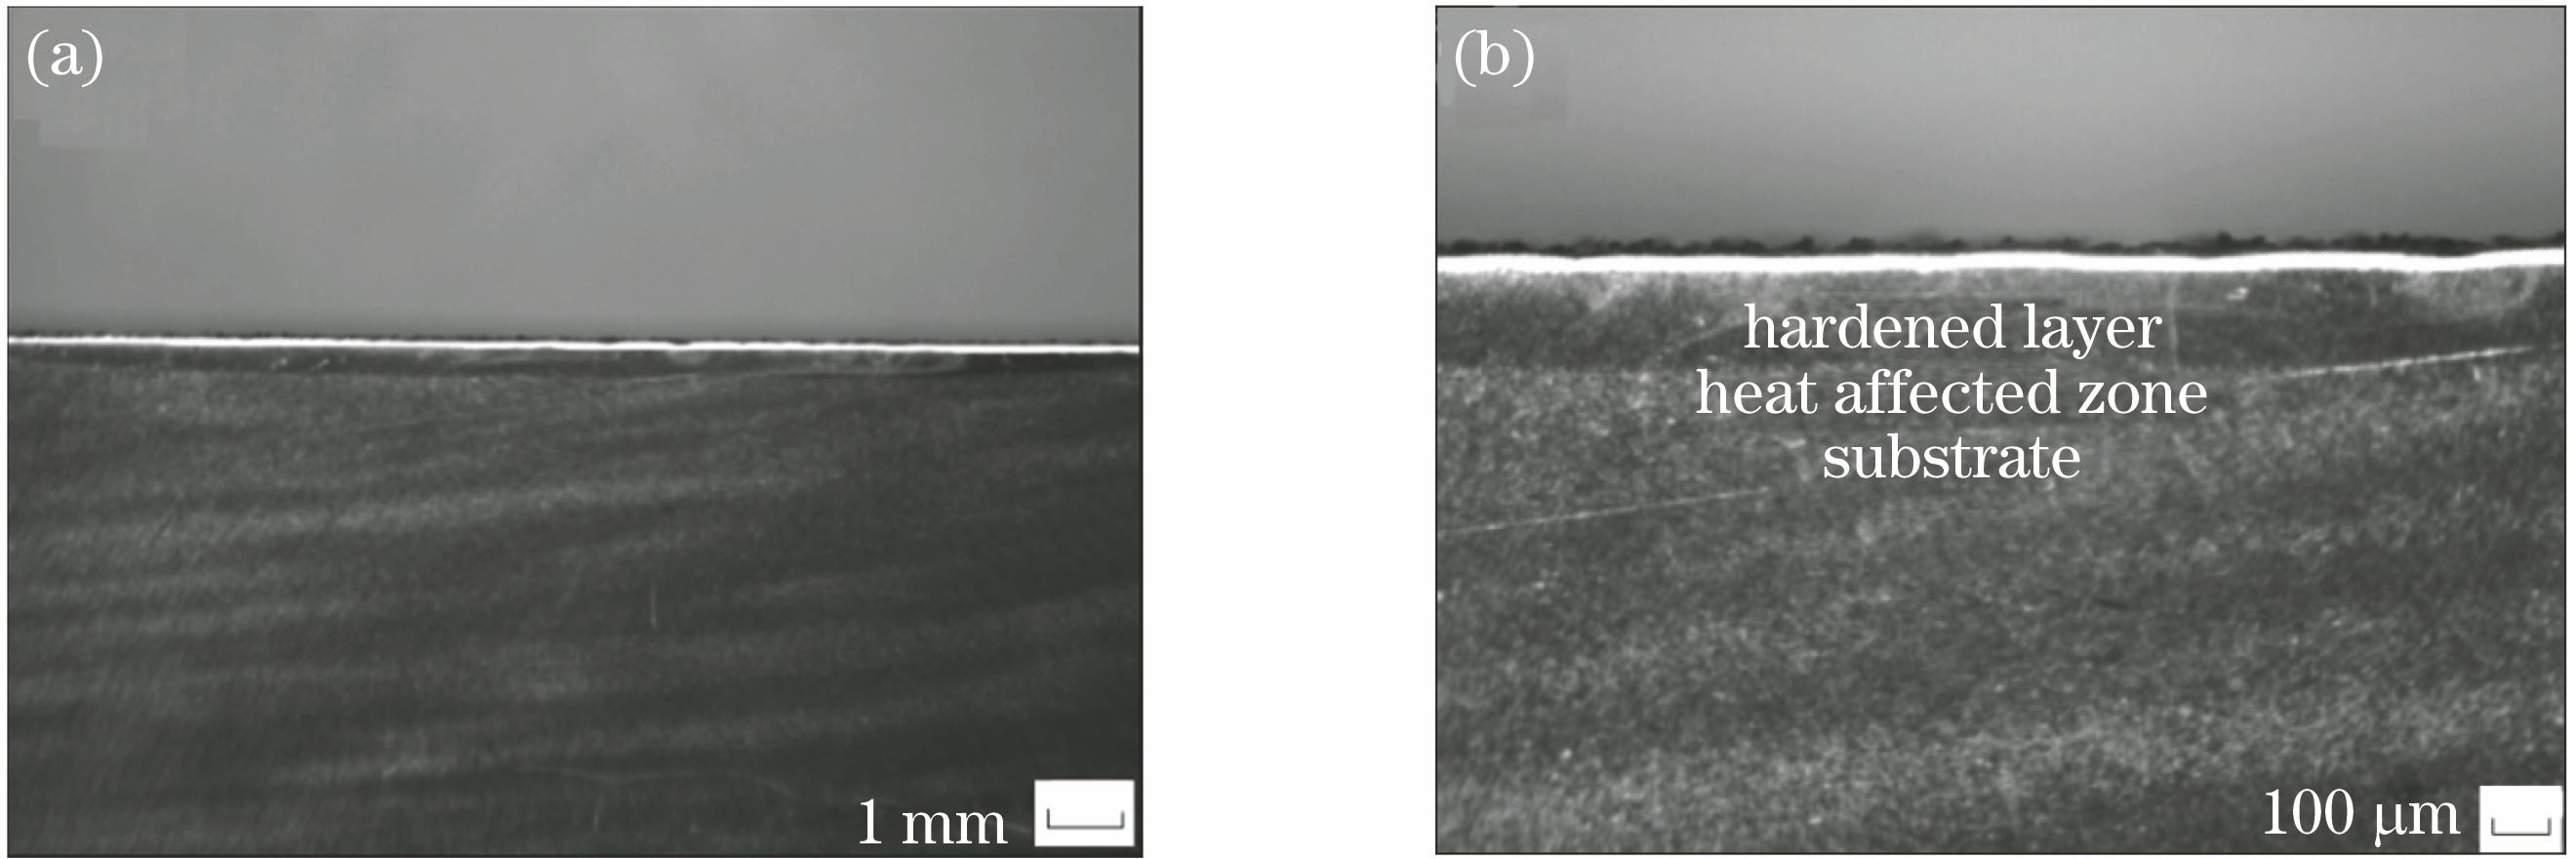 Cross-sectional morphology of laser-quenched 40CrNiMoA steel. (a) Photograph of low-power stereo microscope; (b) photograph of high-power stereo microscope